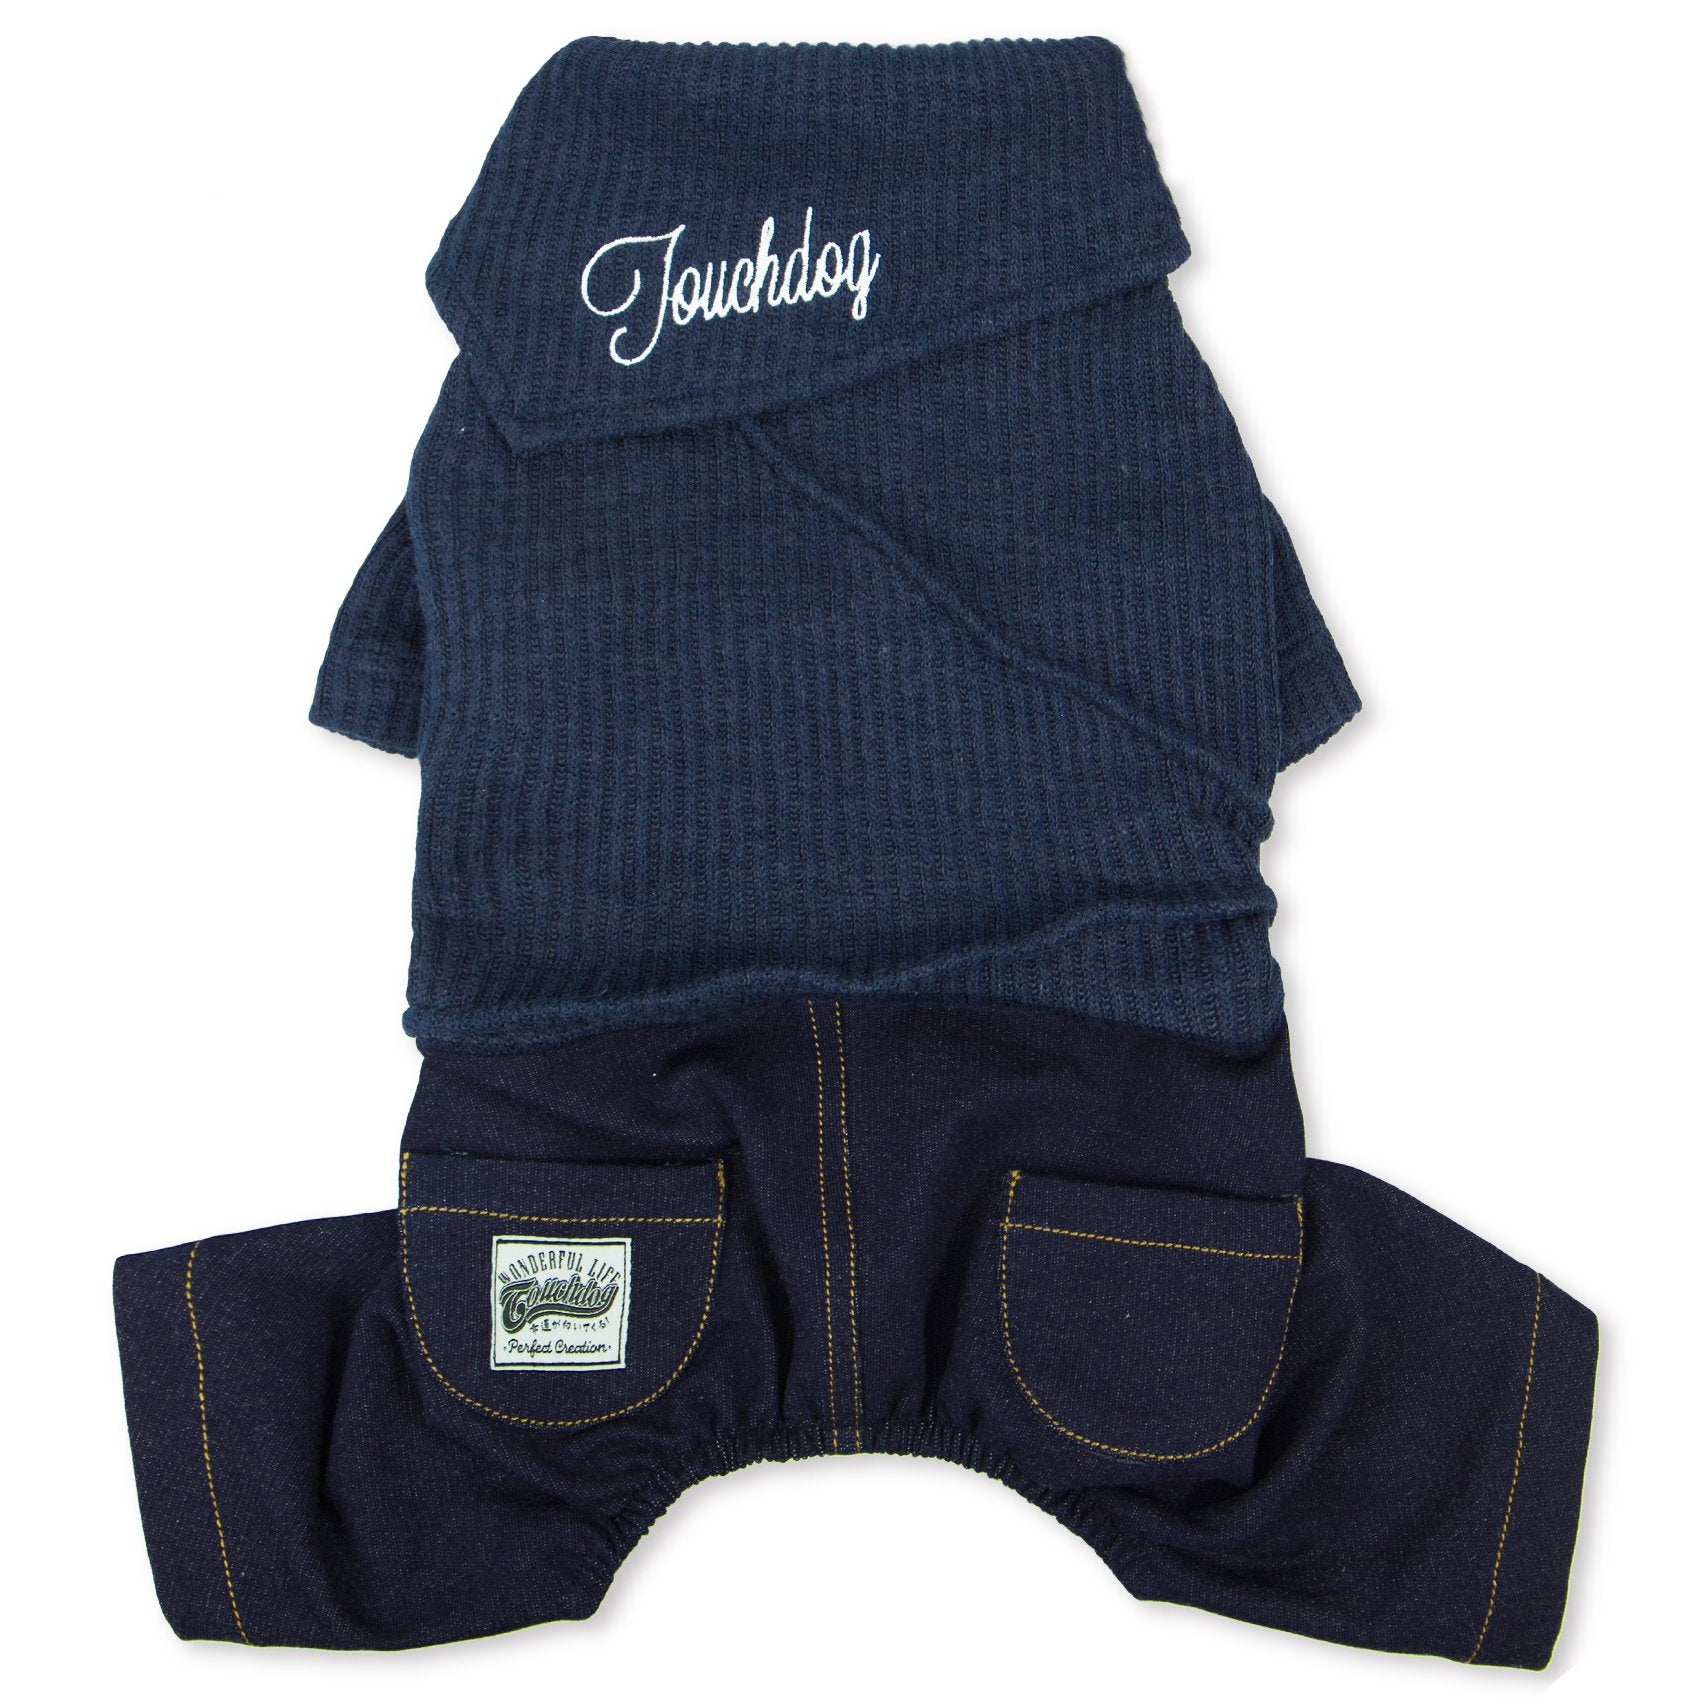 Touchdog Vogue Sweater & Denim Pant Outfit - X-Large - Navy